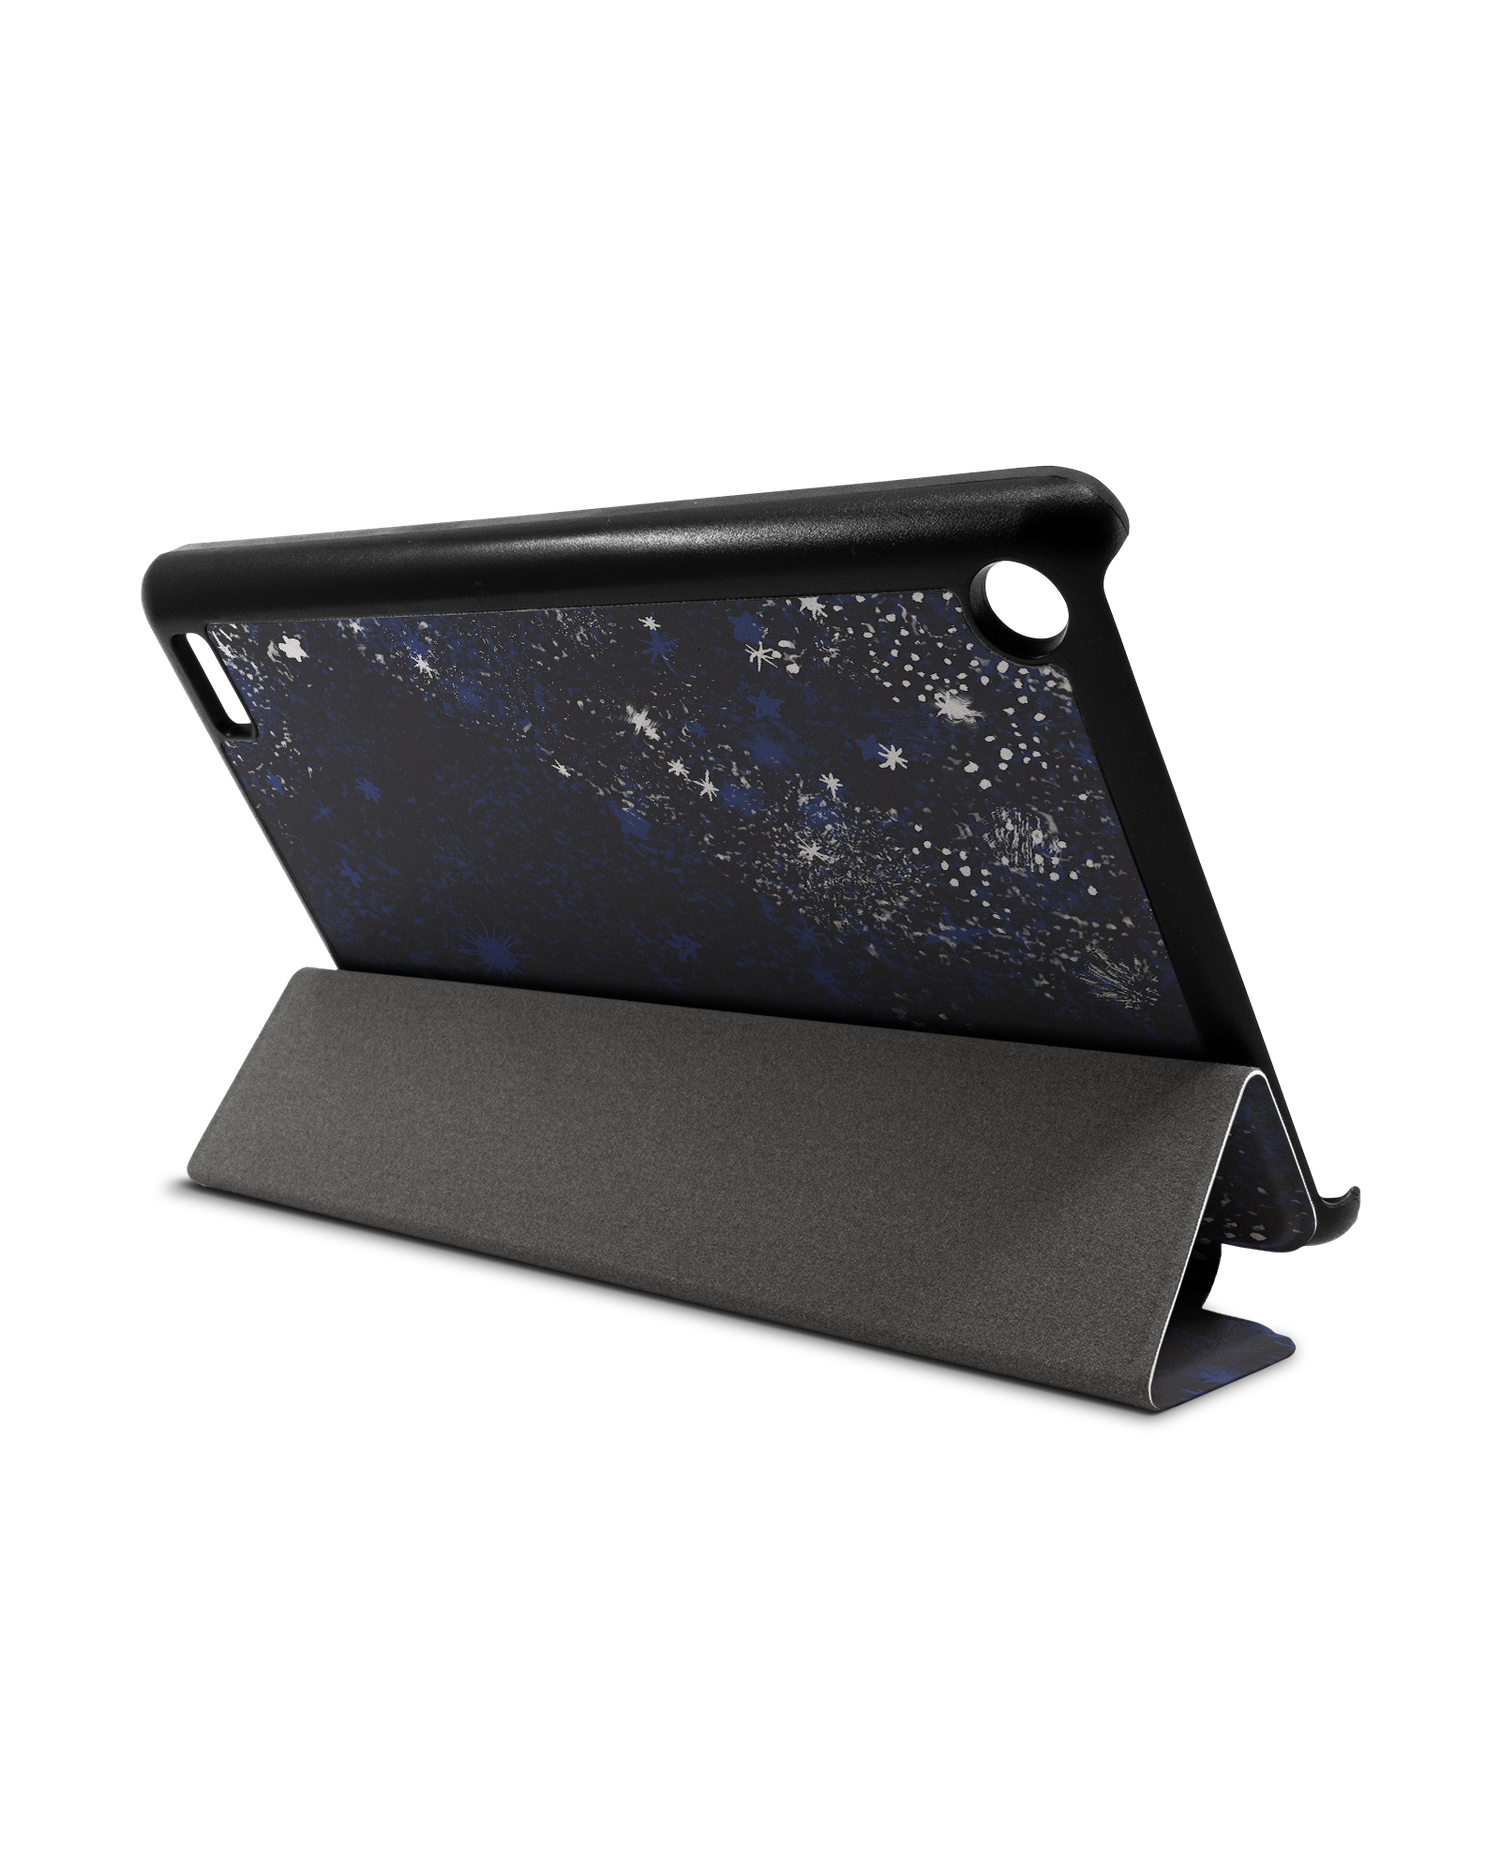 Starry Night Sky Tablet Smart Case for Amazon Fire 7: Used as Stand